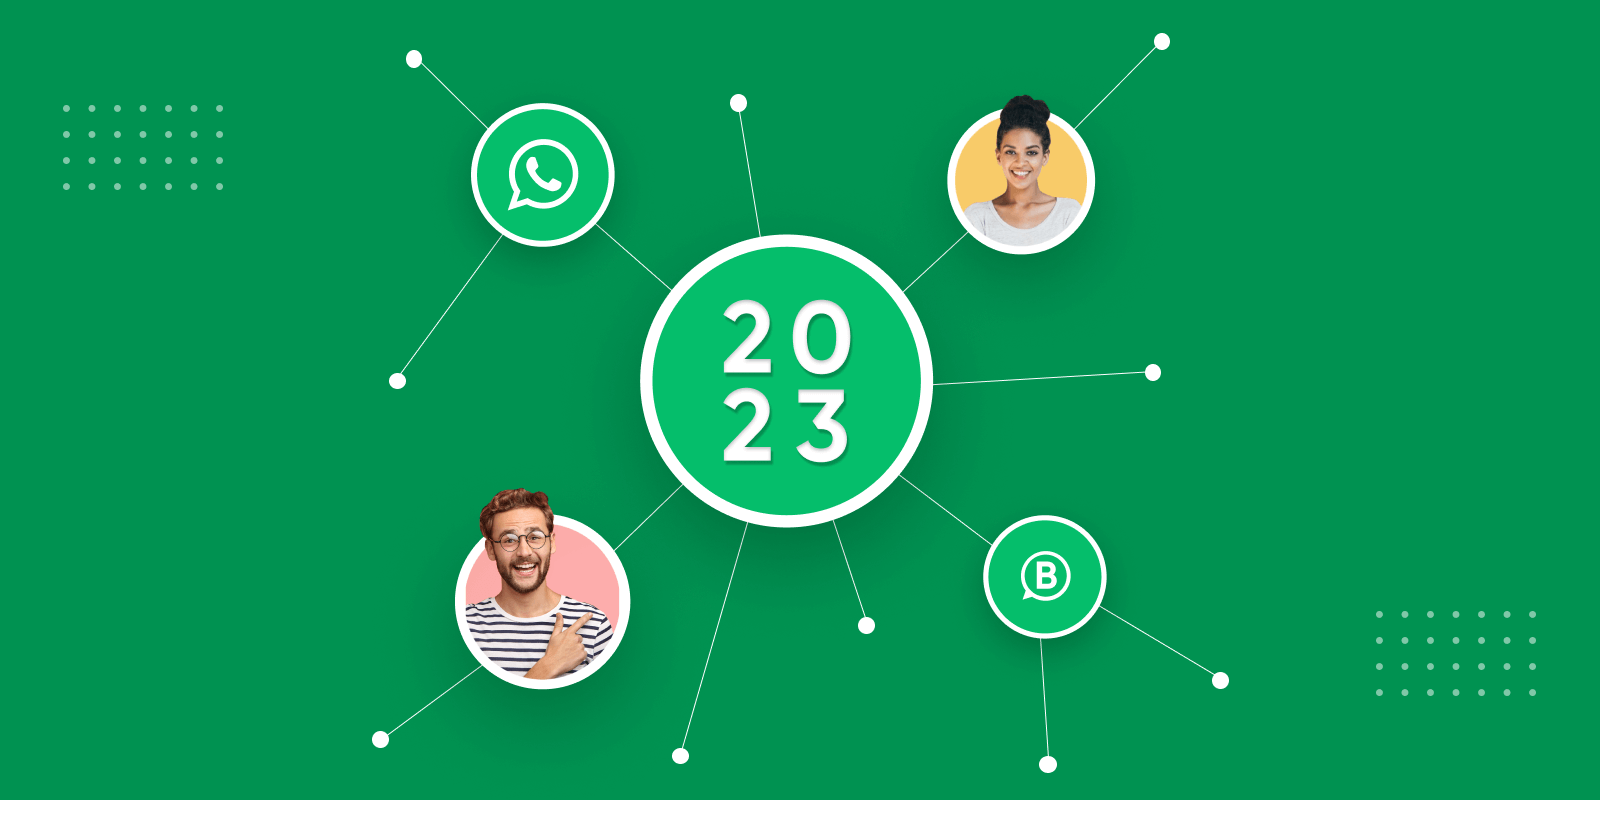 WhatsApp Statistics for 2023 - All You Need to Know - Verloop.io